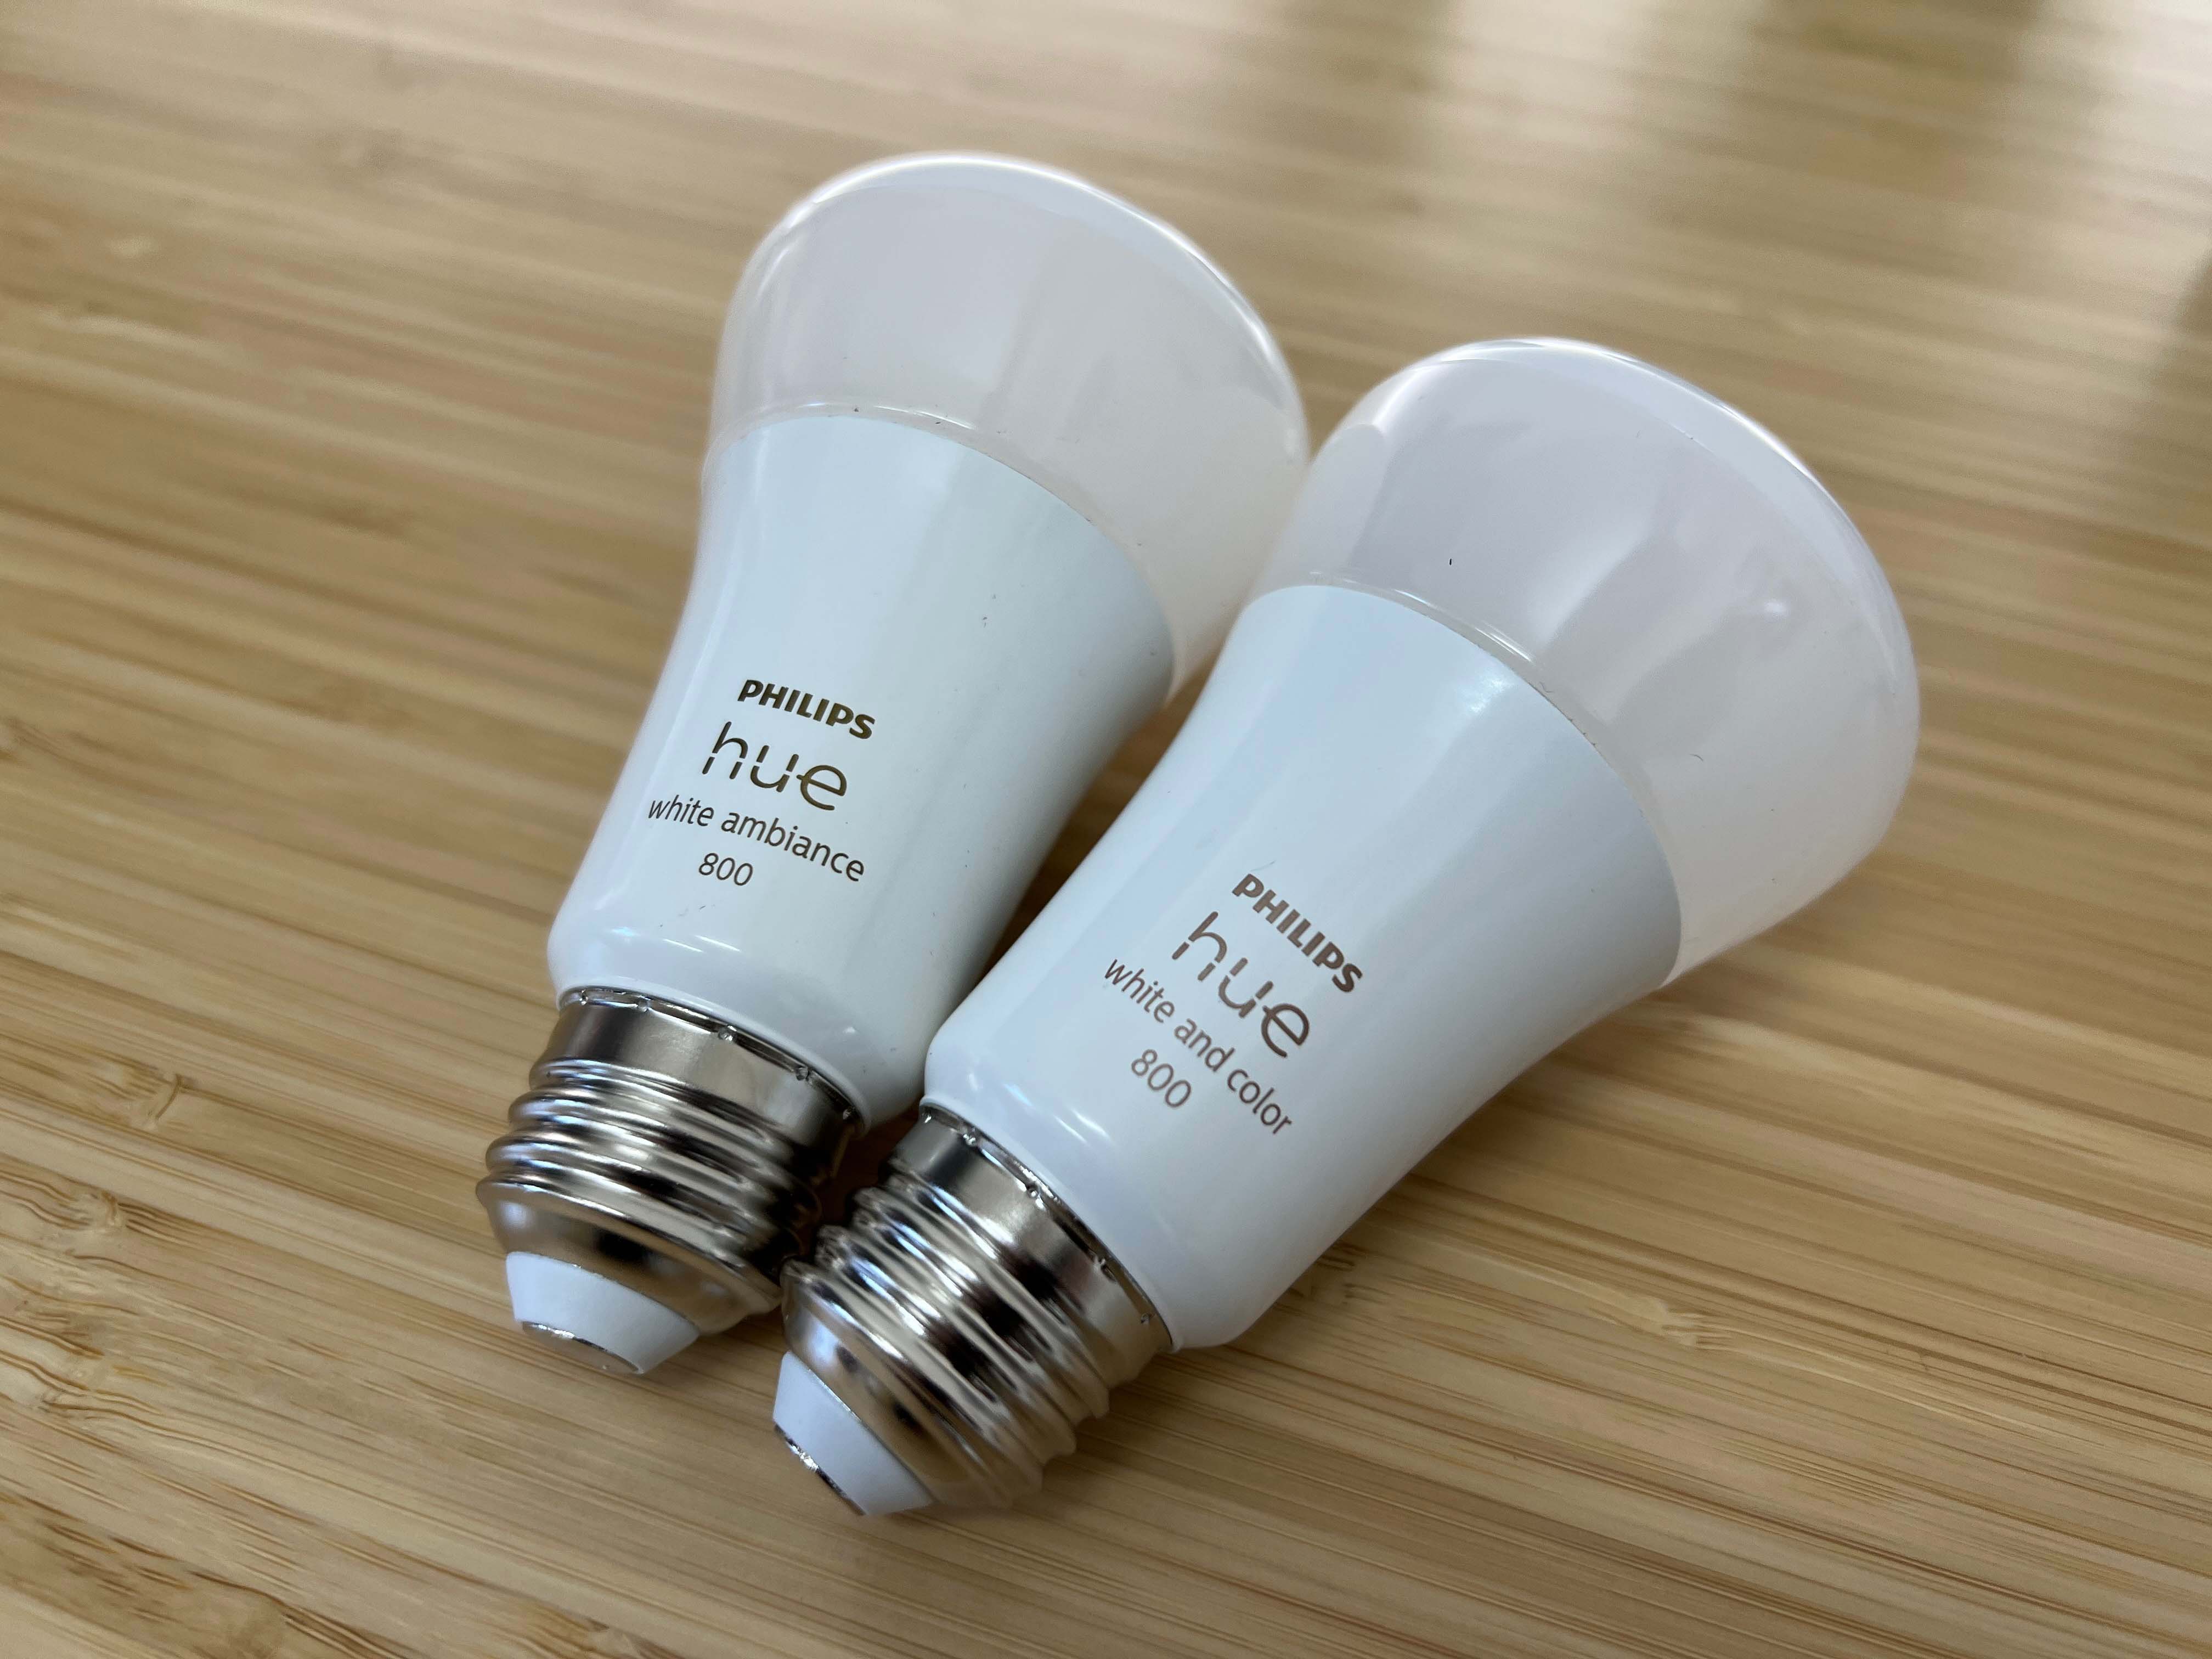 Philips starter kits make a worthy, expensive entry into smart lighting | CNN Underscored